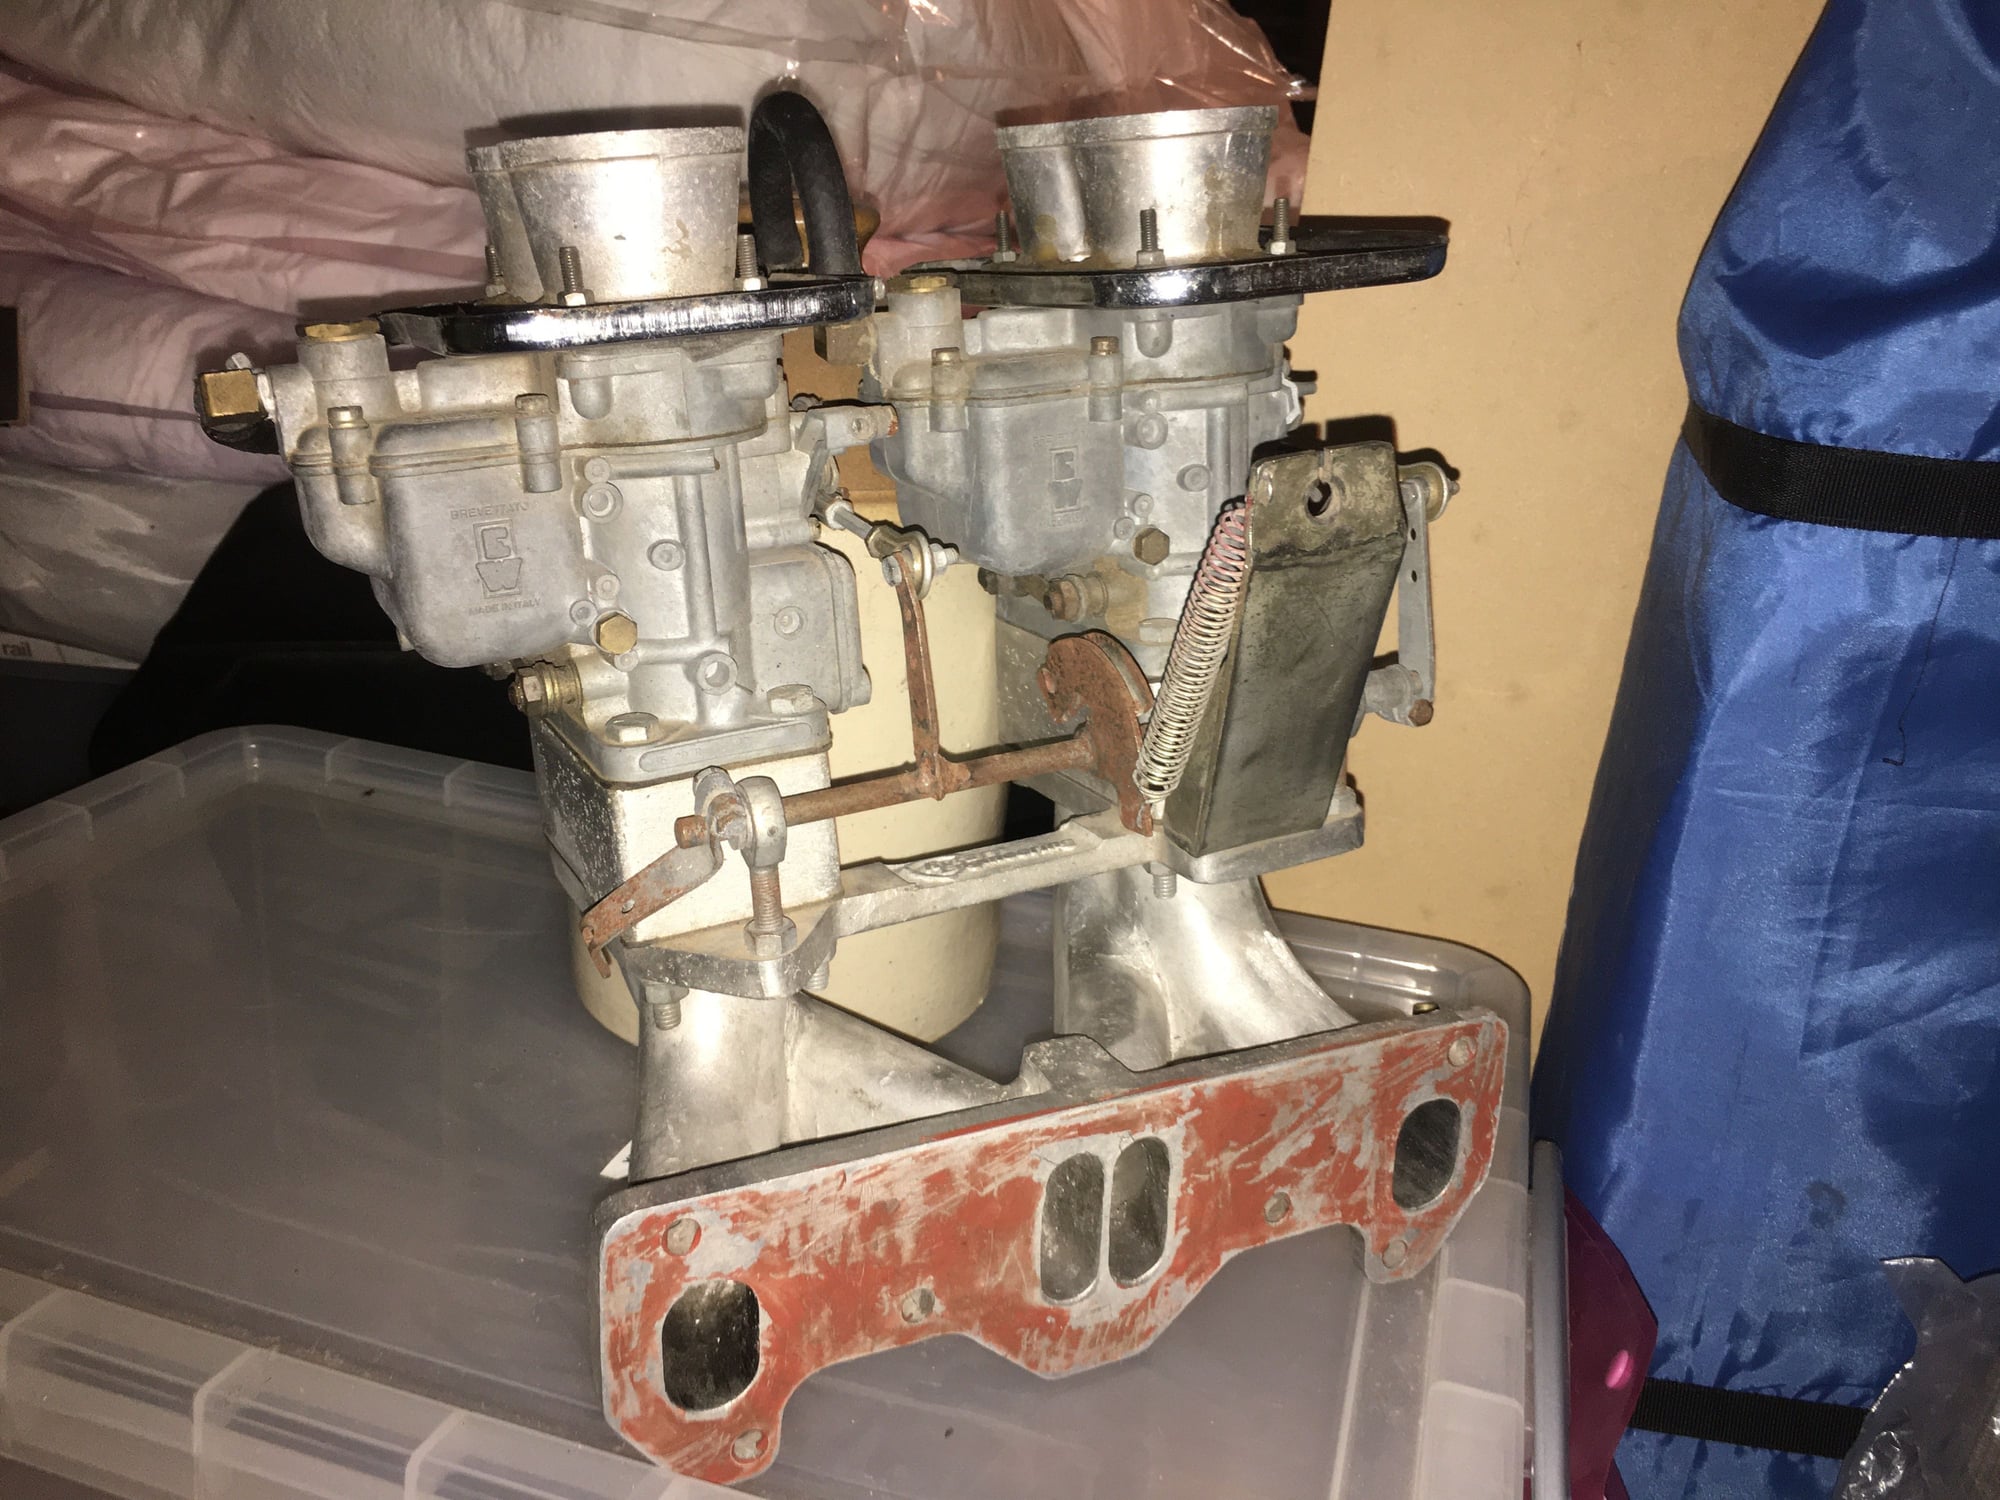 Engine - Intake/Fuel - WTB: rotary engineering 36mm dcd intake for 13b - New or Used - Skive, Denmark